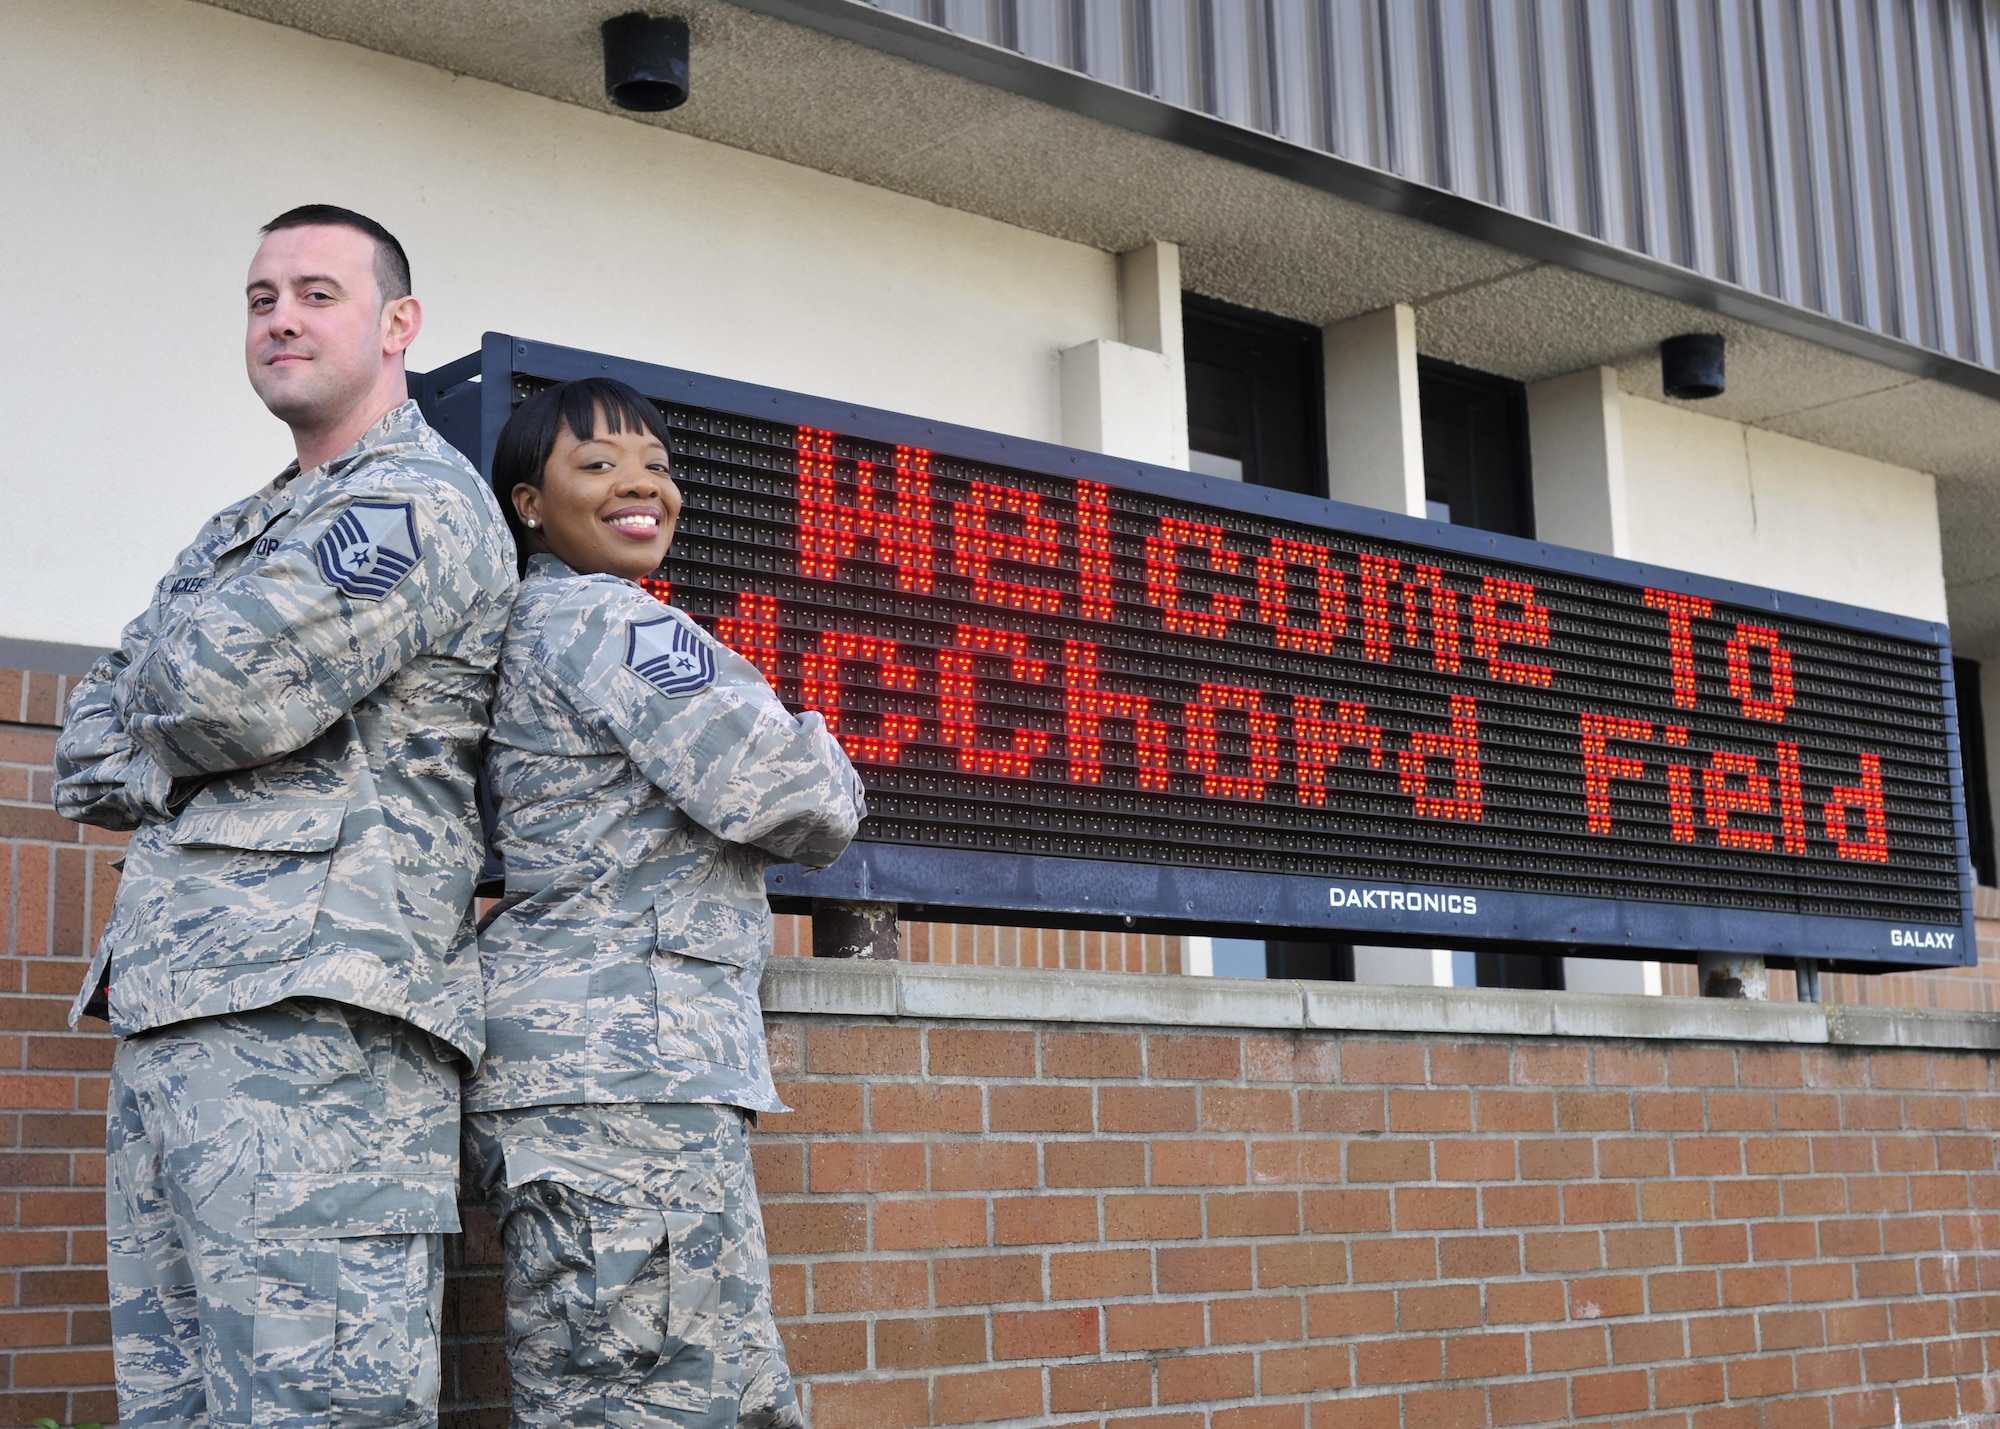 Master Sgt. Theodore (T.J.) McKee, 62nd Aerial Port Squadron passenger service operations NCOIC, and wife, Master Sgt. Tiffany McKee, 627th Logistics Readiness Squadron logistics plans superintendent, pose for a photo on the McChord Field flightline at Joint Base Lewis-McChord, Wash., March 16, 2017. Separated by military orders for more than half of their 4-year marriage, the McKees reunited at JBLM in early 2016 and ended the year as Team McChord Annual Award winners in their respective categories of NCO and SNCO. (U.S. Air Force photo/Staff Sgt. Whitney Amstutz)